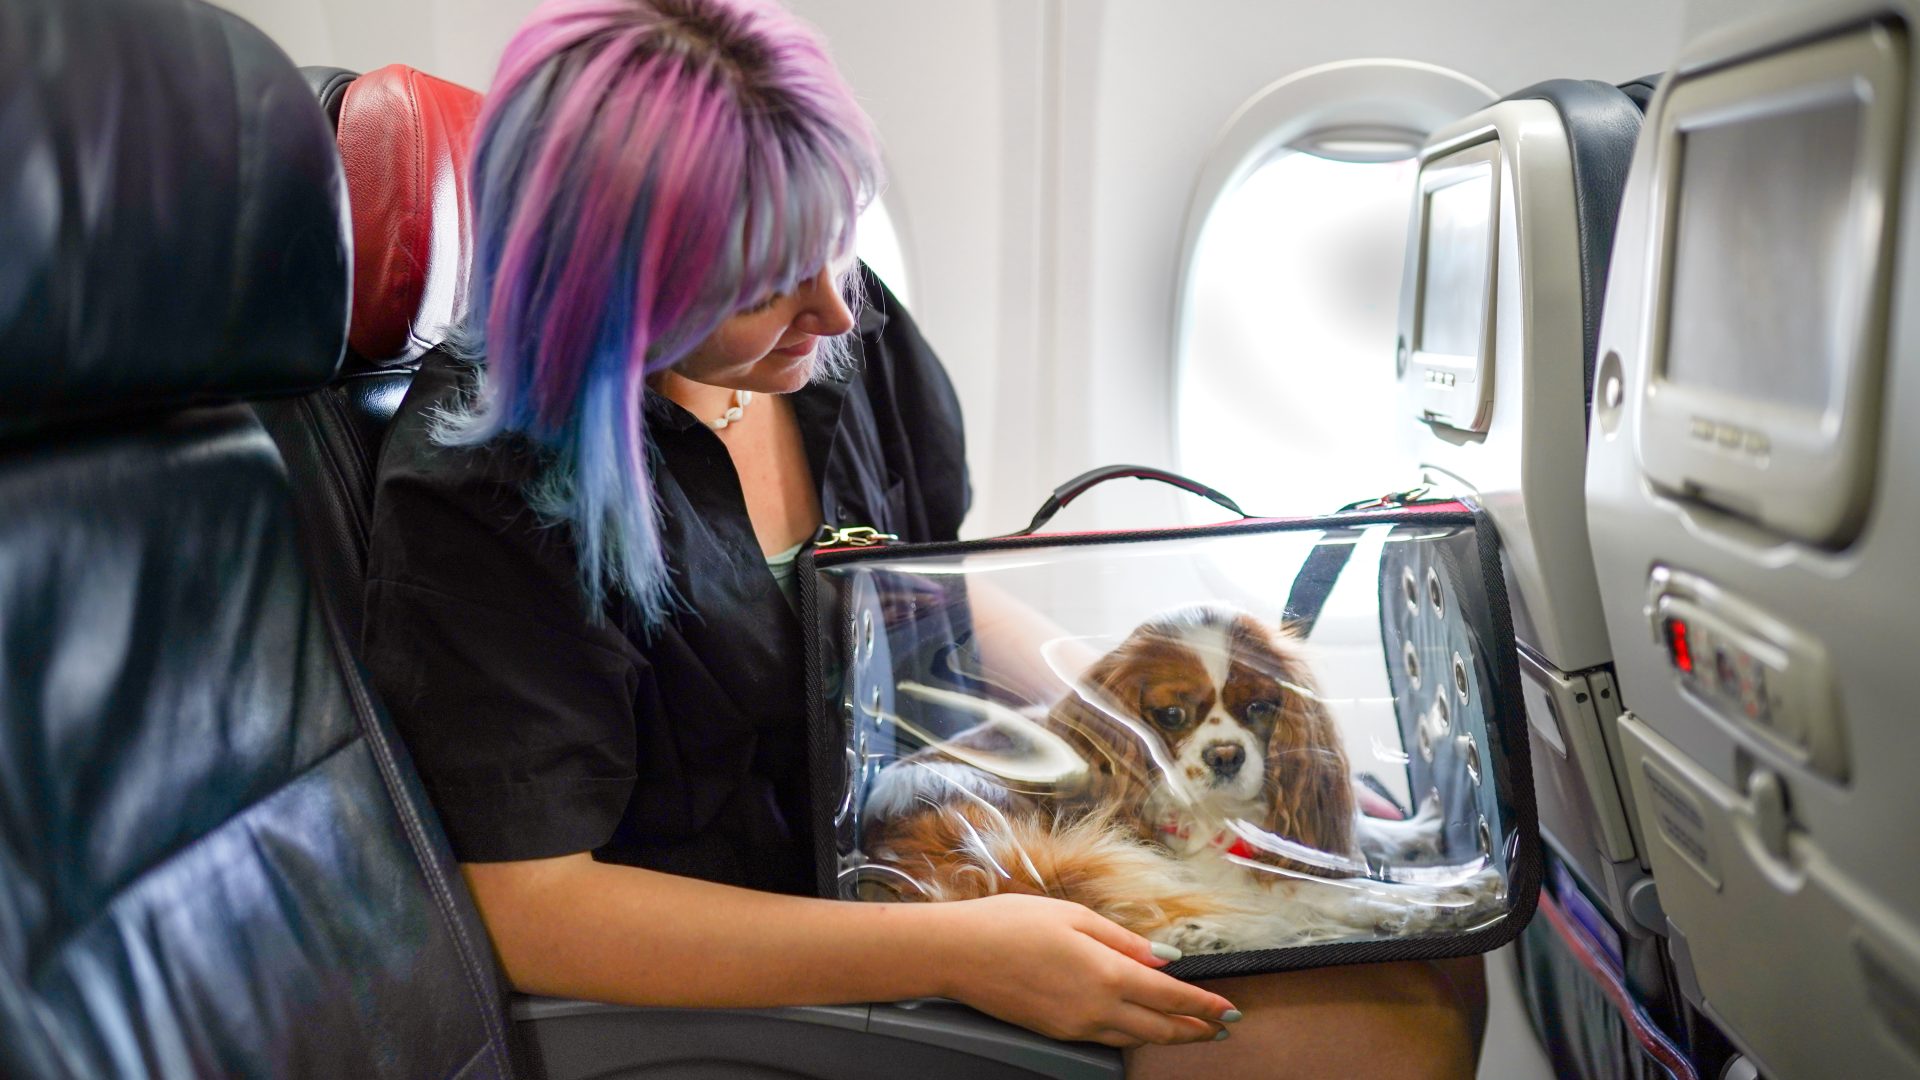 can you travel with 2 dogs on a plane